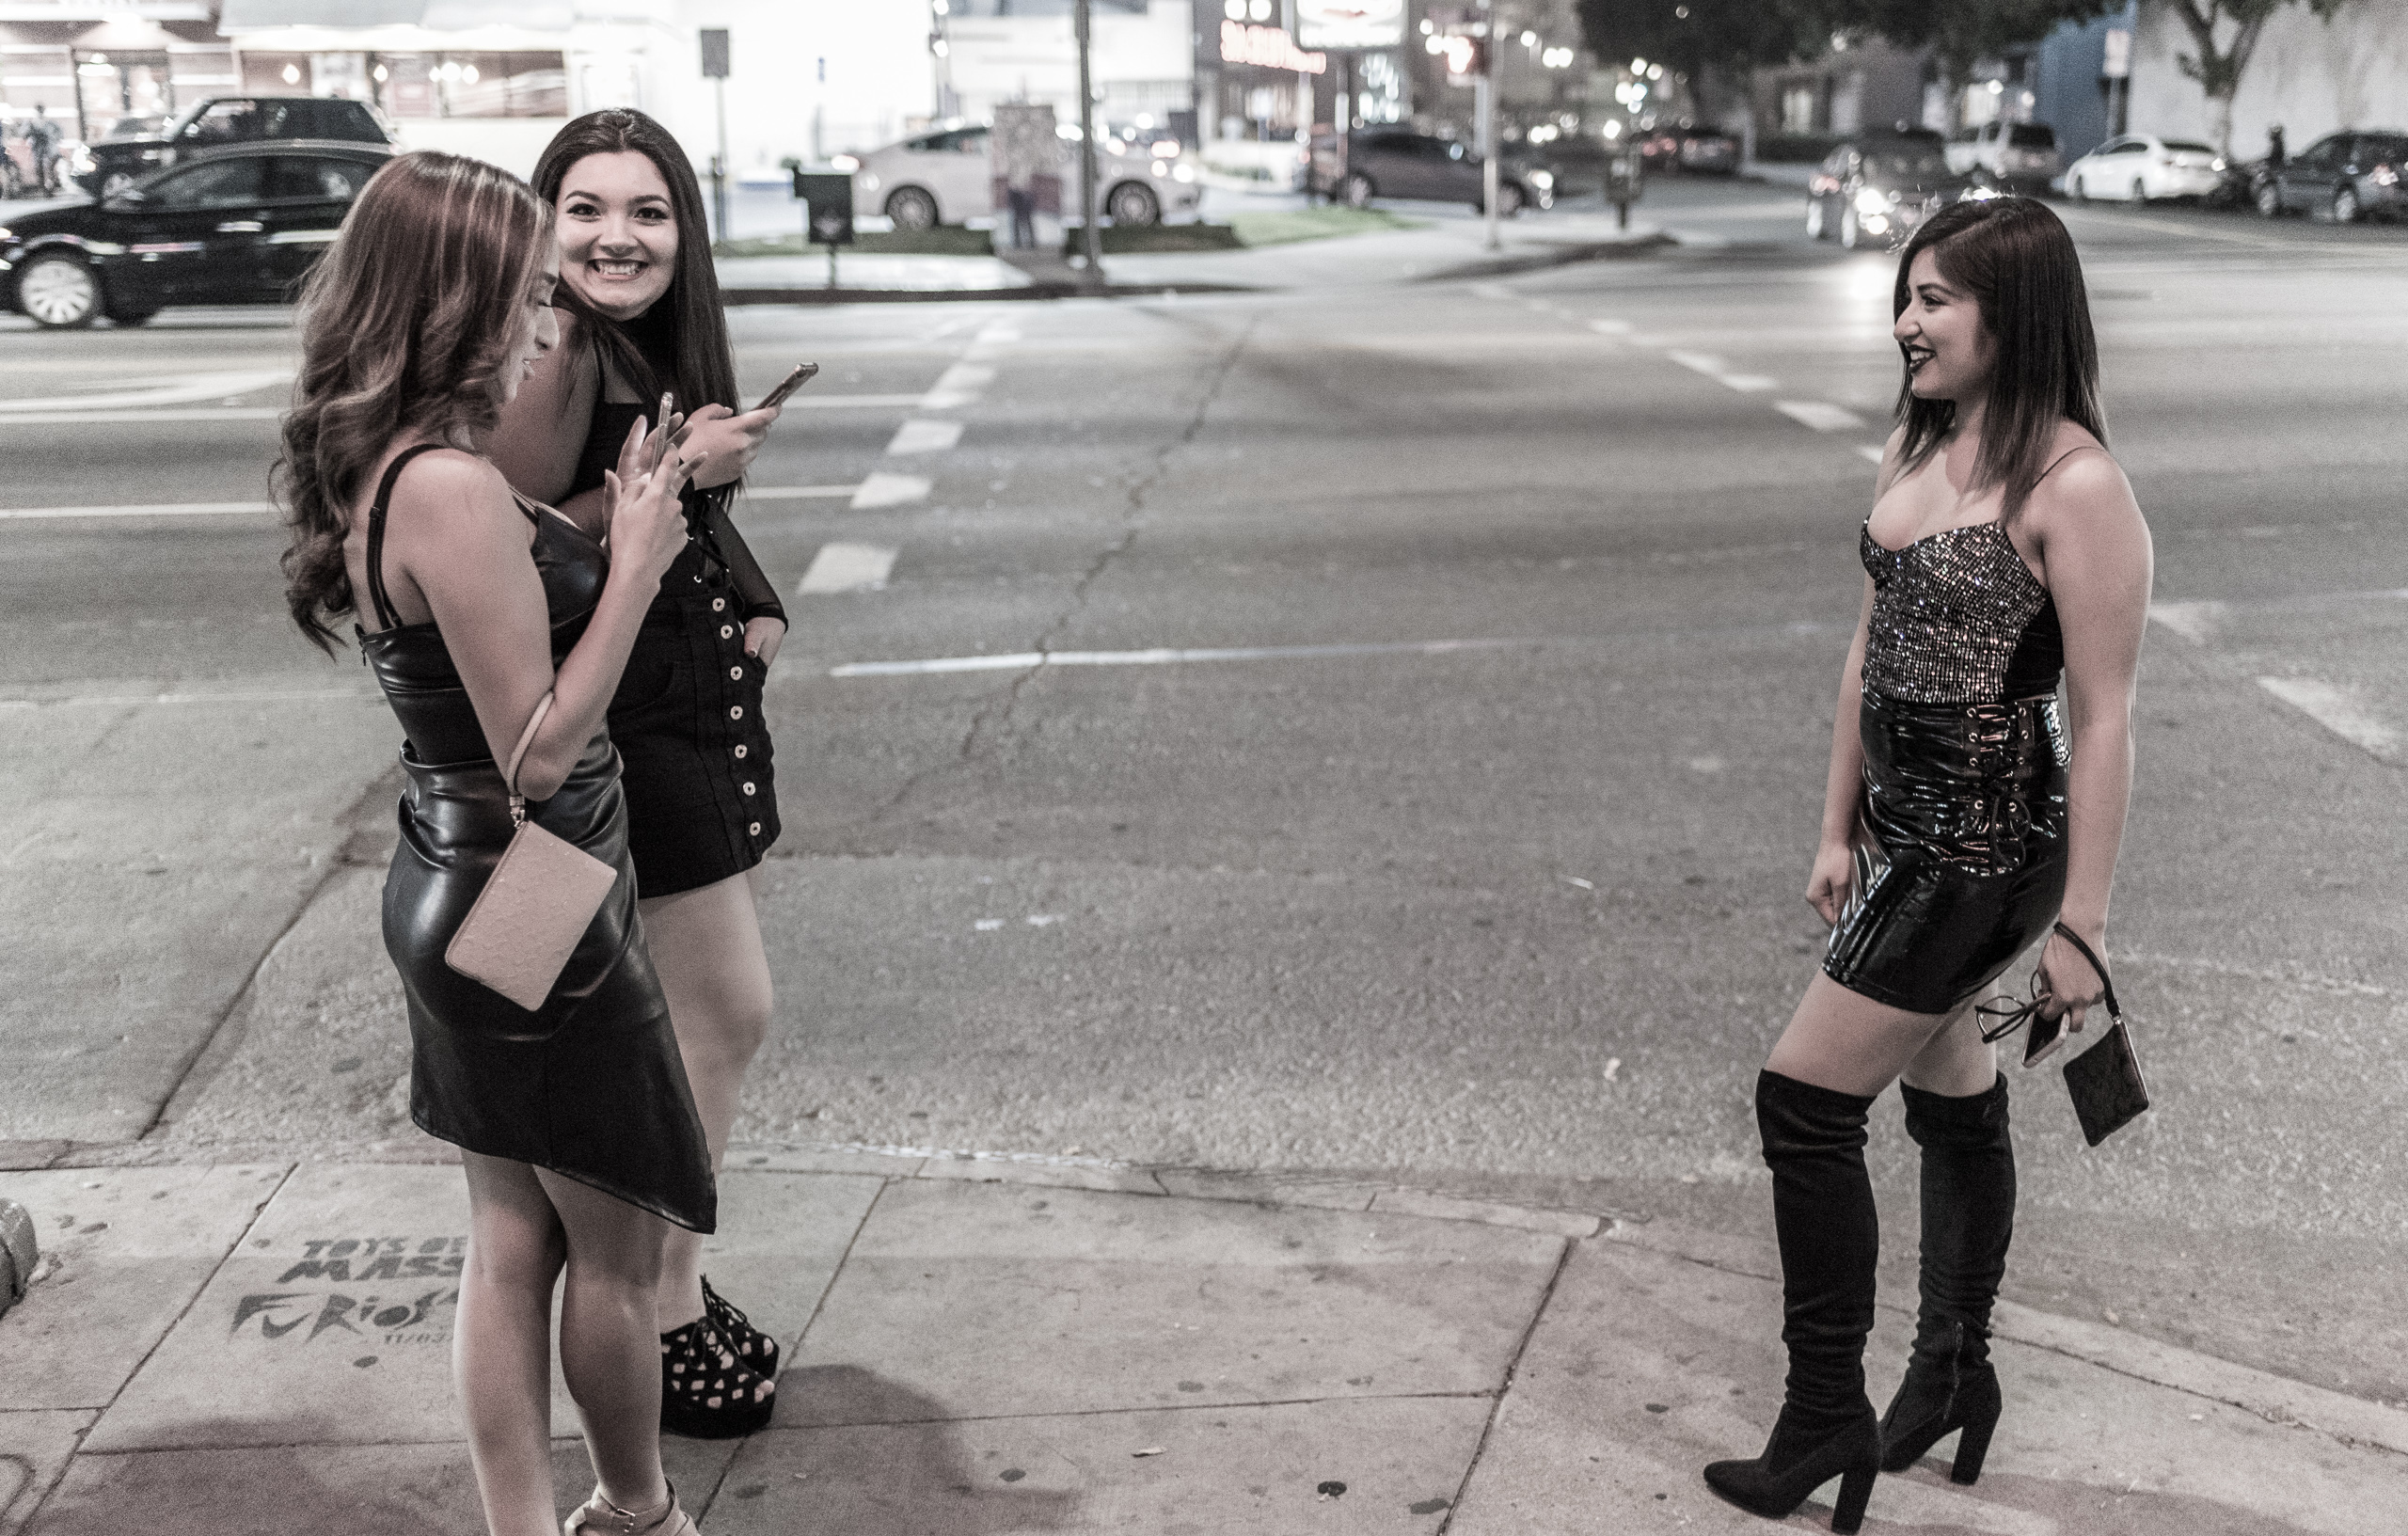 On the corner of Sunset & Ivar in Hollywood, a girl poses for her 2 friends who take her picture with their cell phones